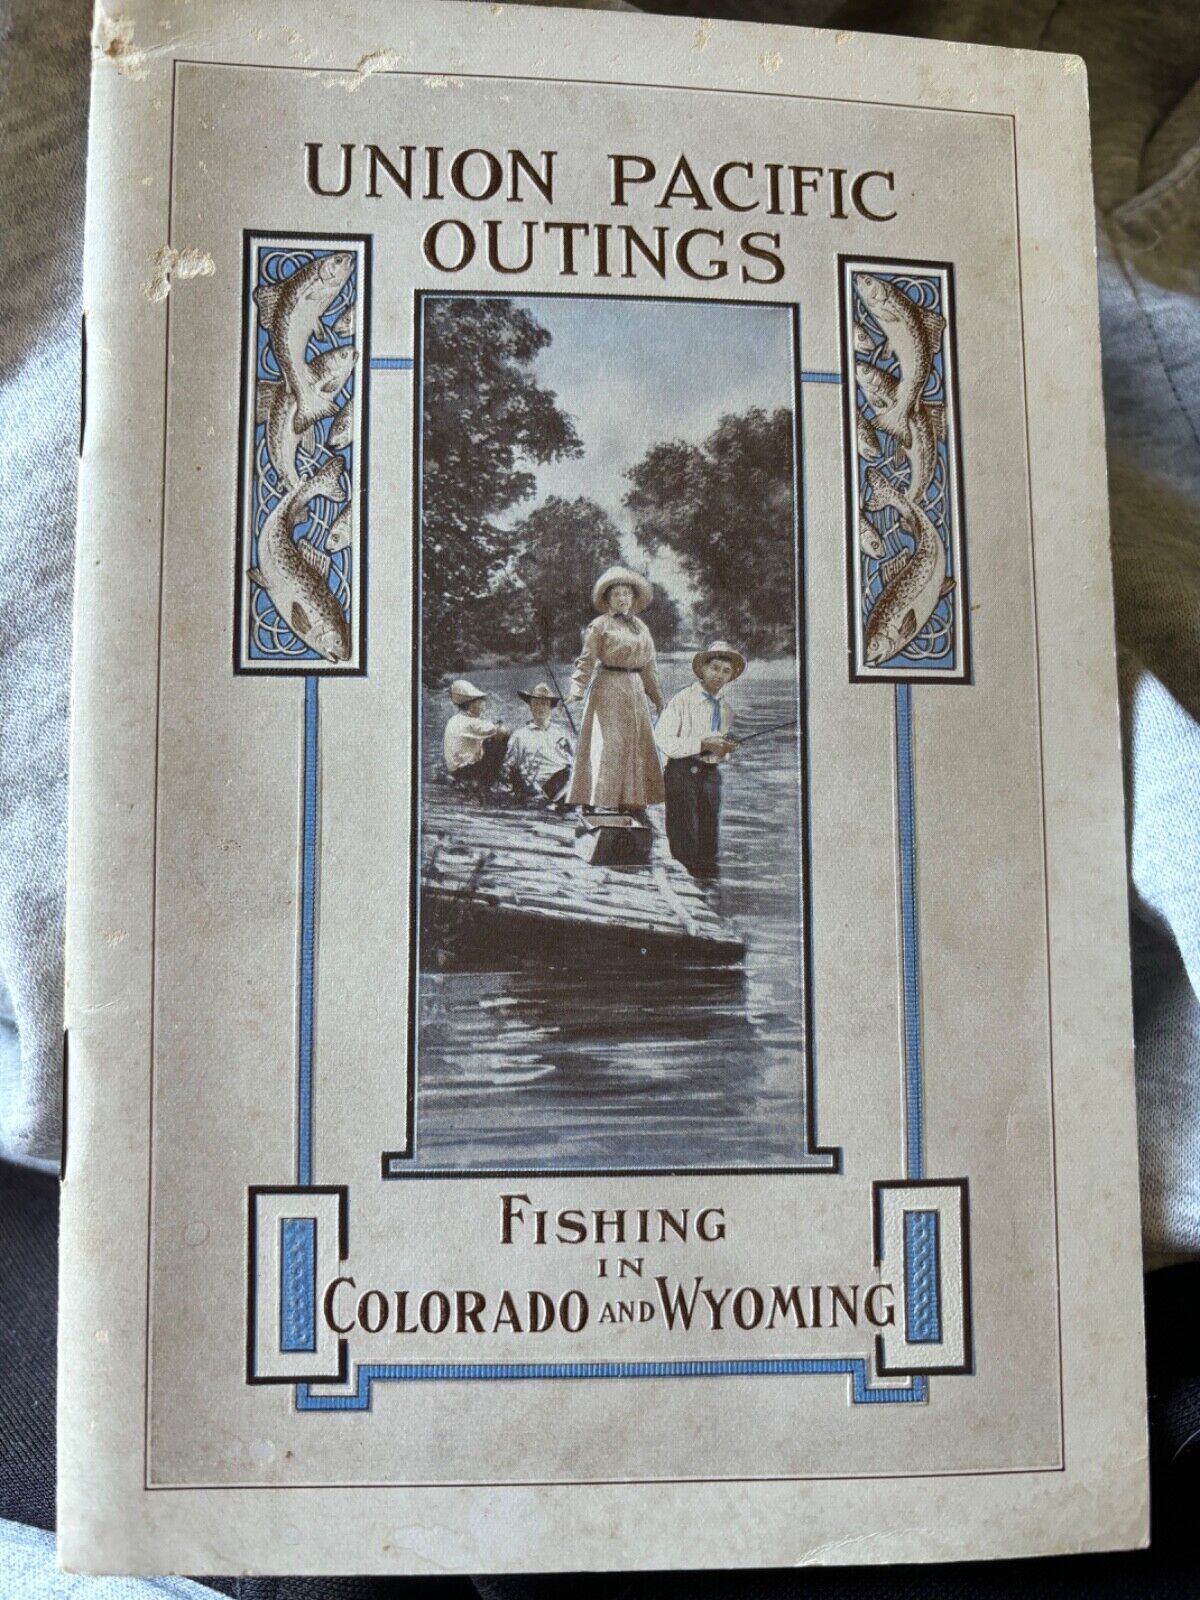 1912 Union Pacific Fishing in Colorado and Wyoming Nice